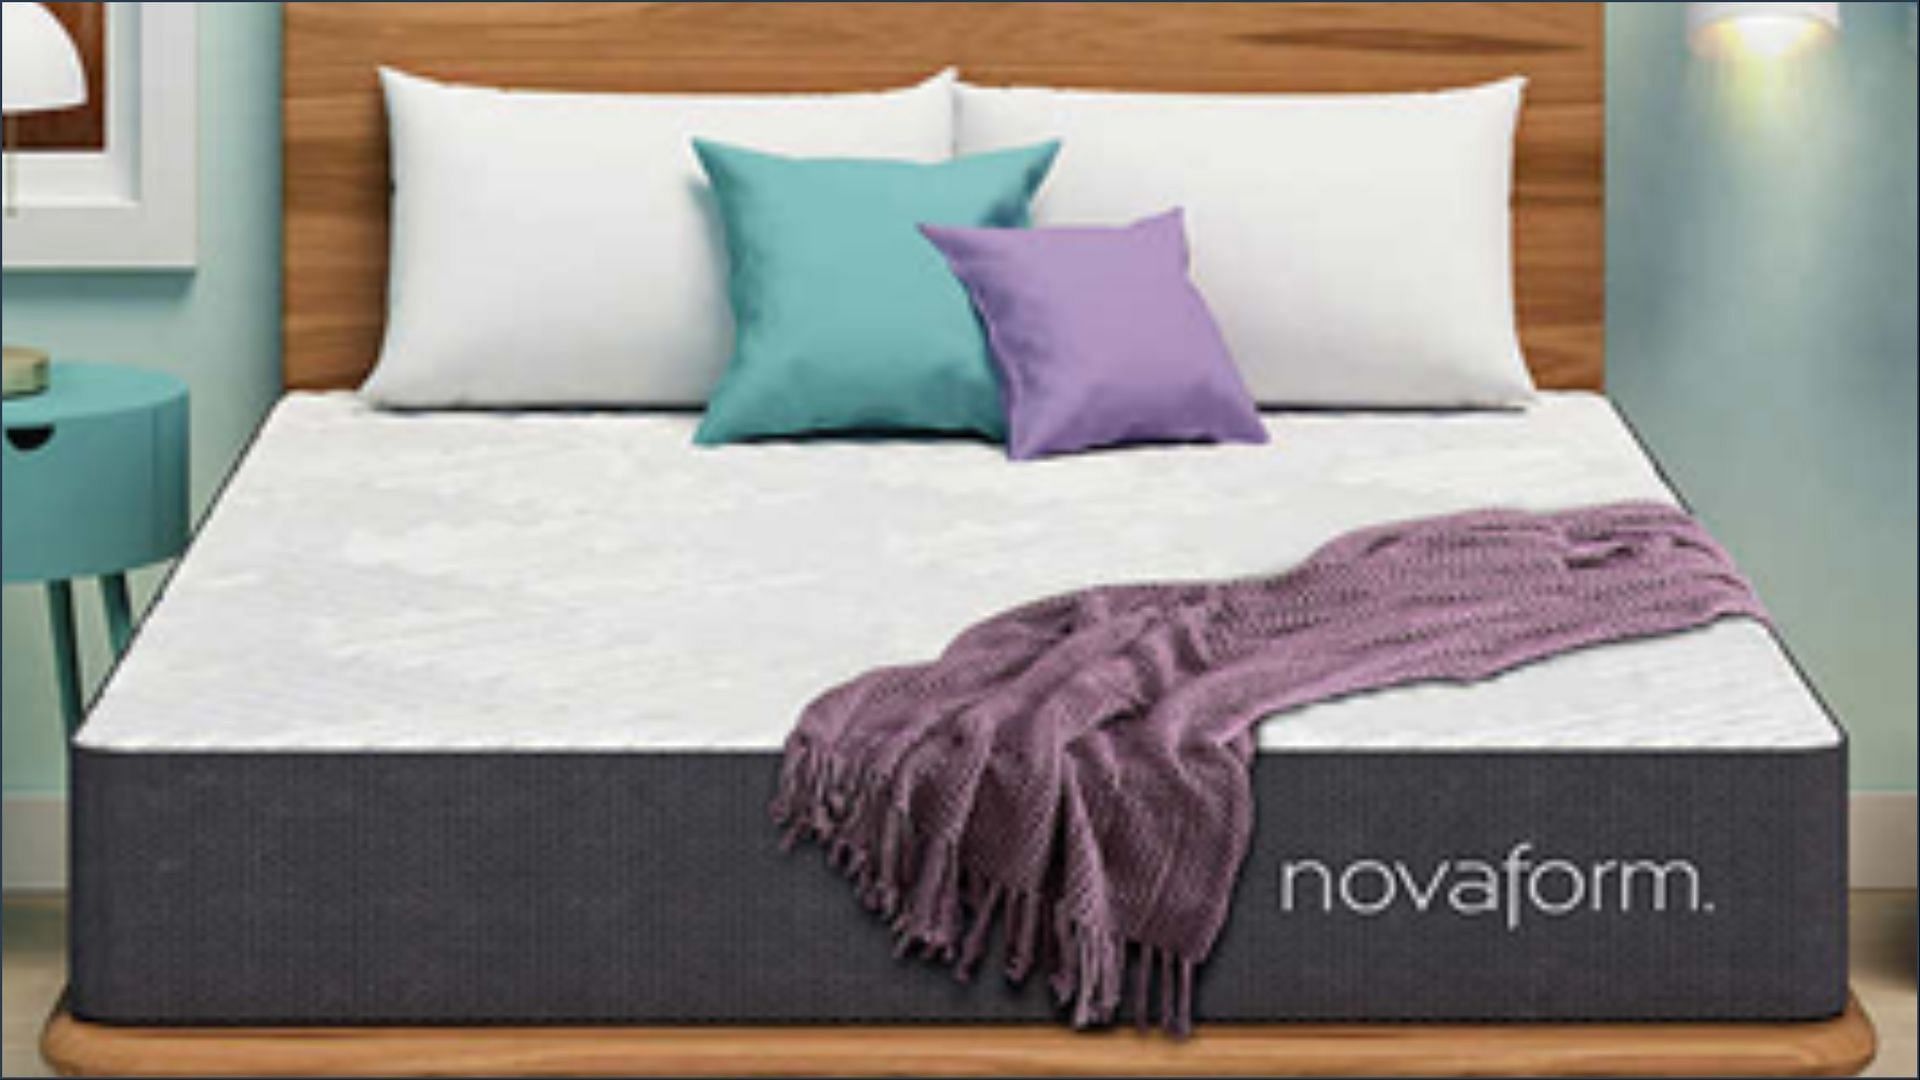 The recalled Novaform mattresses sold at Costco stores should not be used anymore (Image via CPSC)